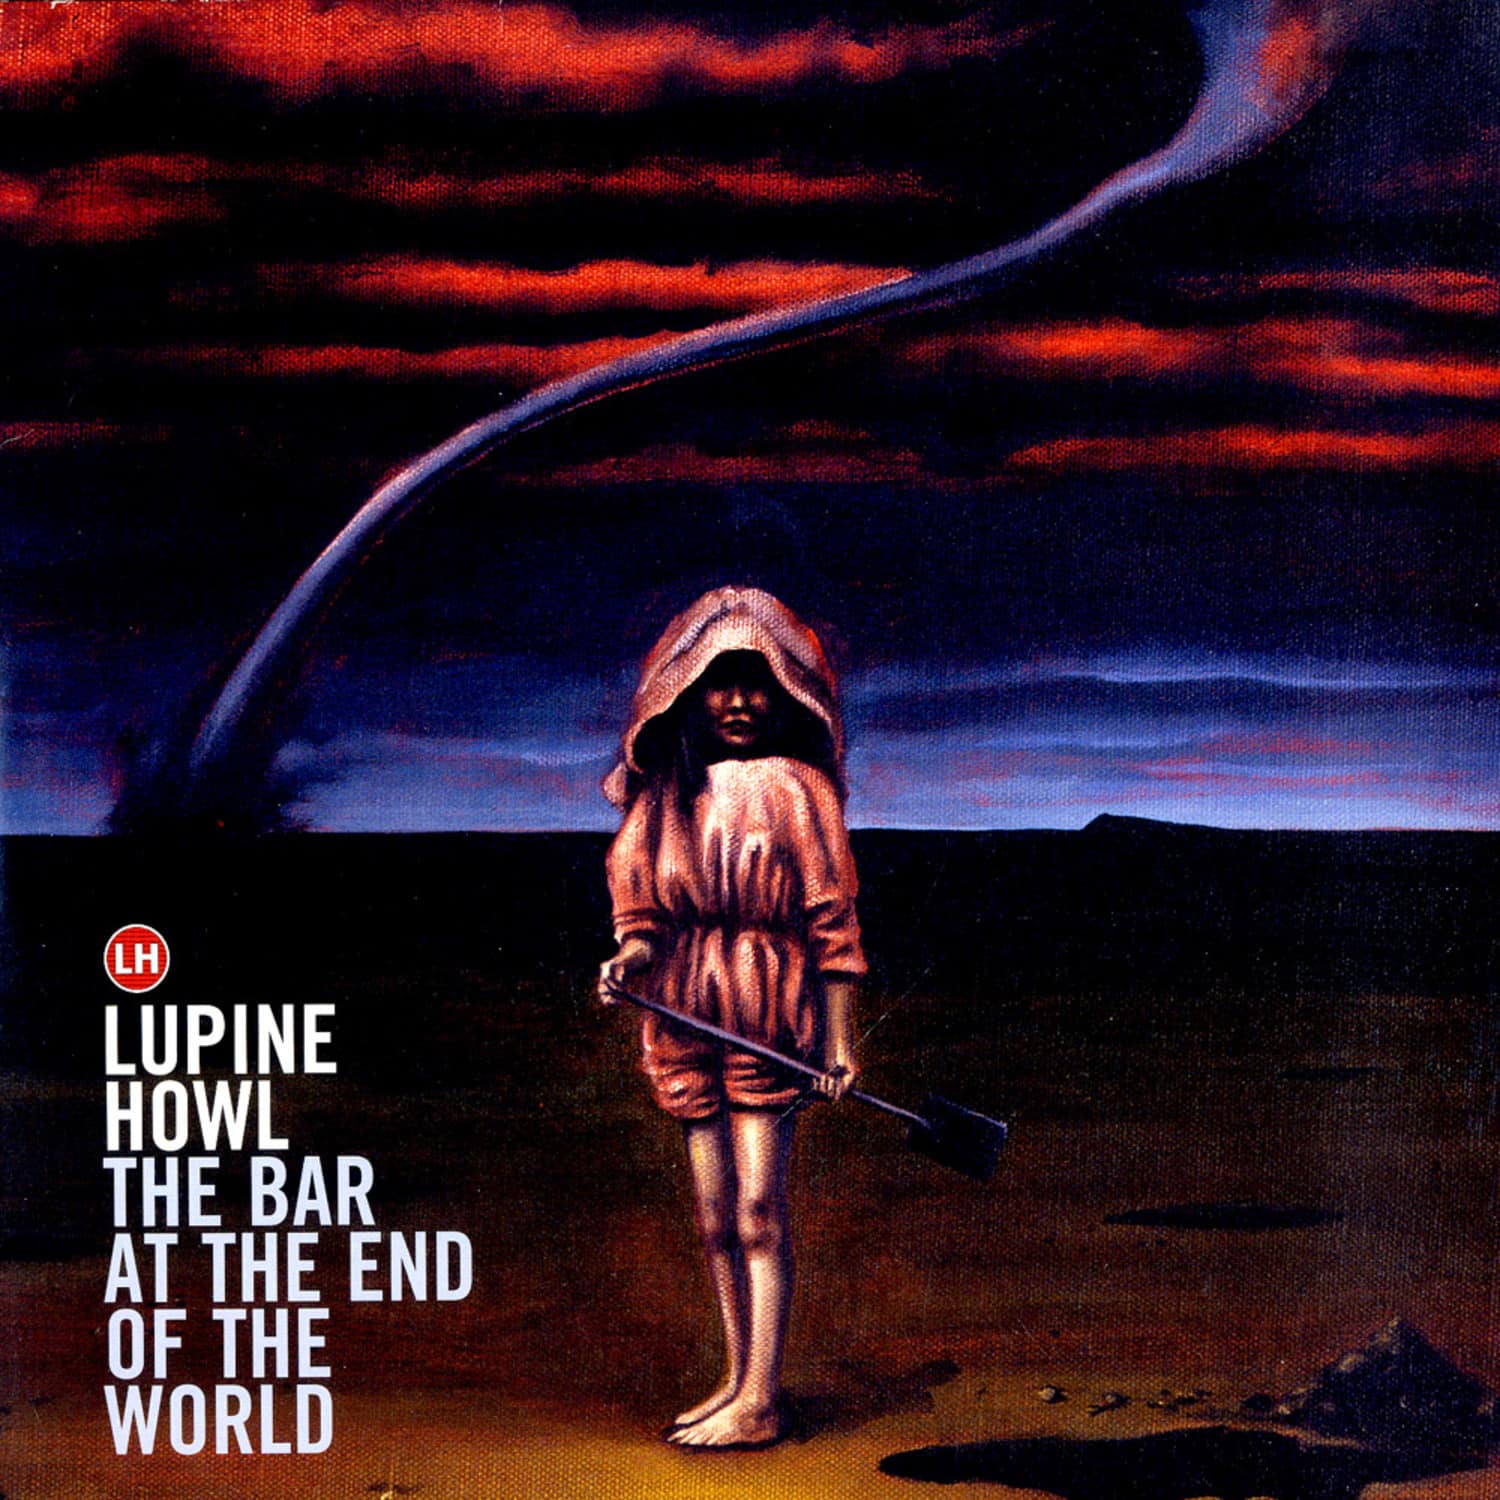 Lupine Howl - THE BAR AT THE END OF THE WORLD